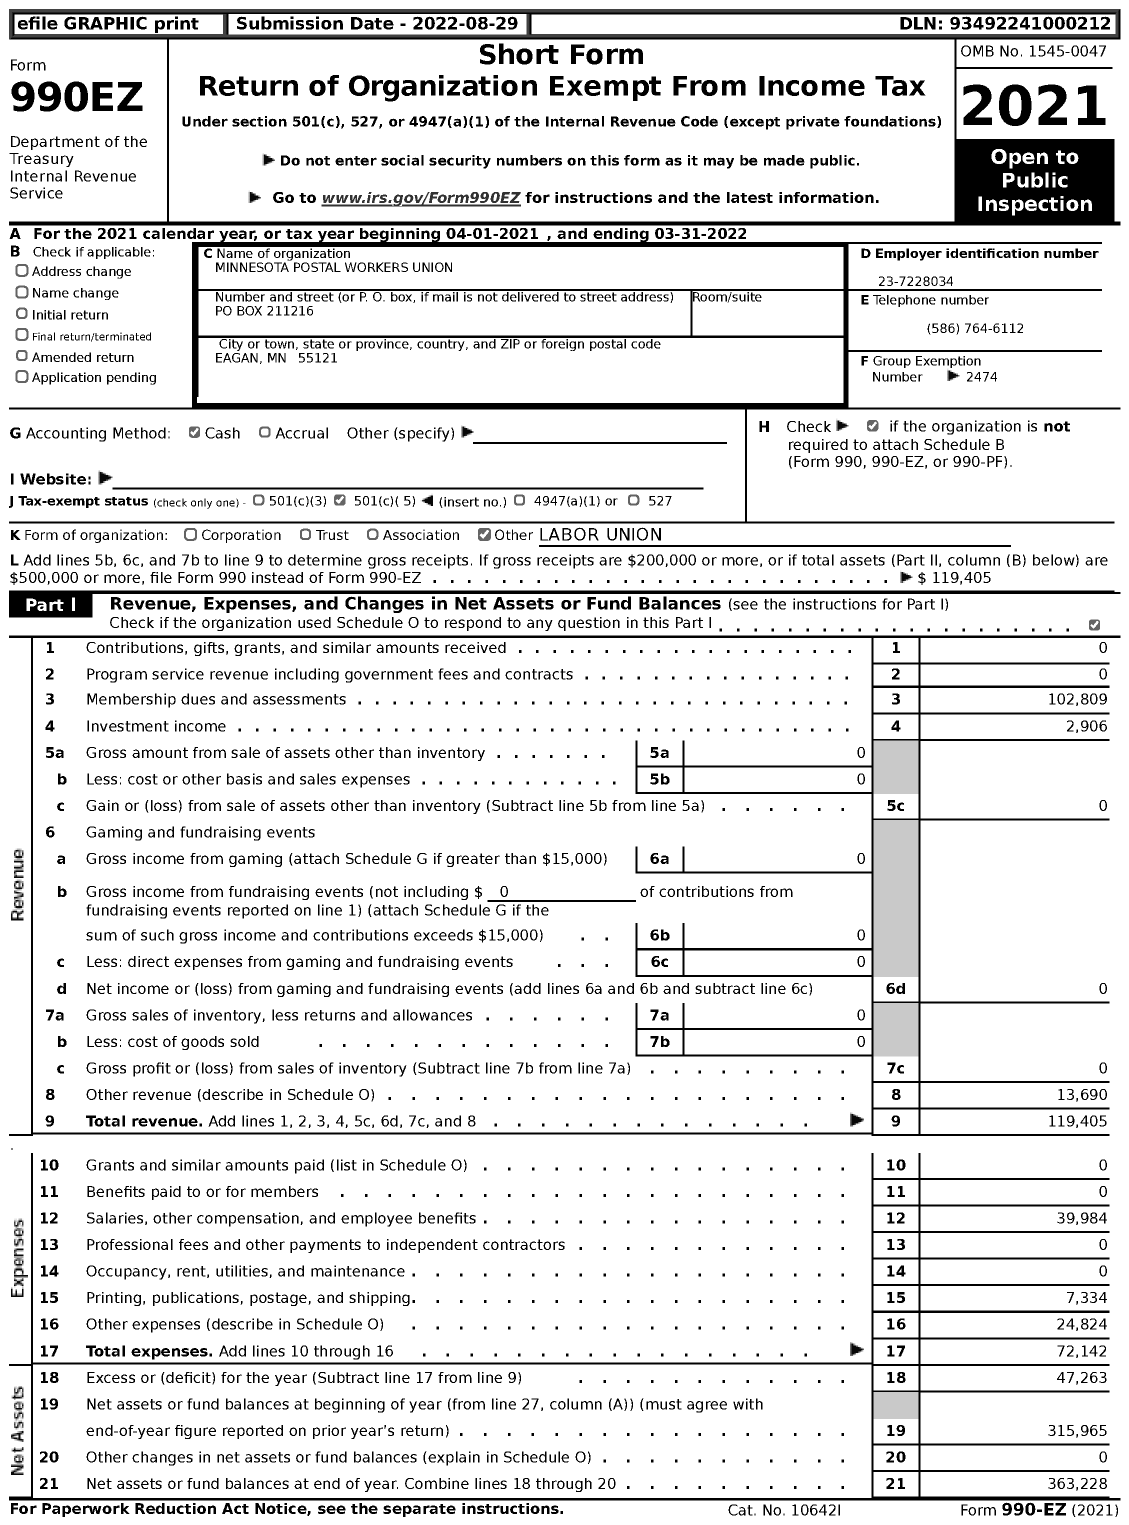 Image of first page of 2021 Form 990EZ for American Postal Workers Union - Minnesota Postal Workers Union